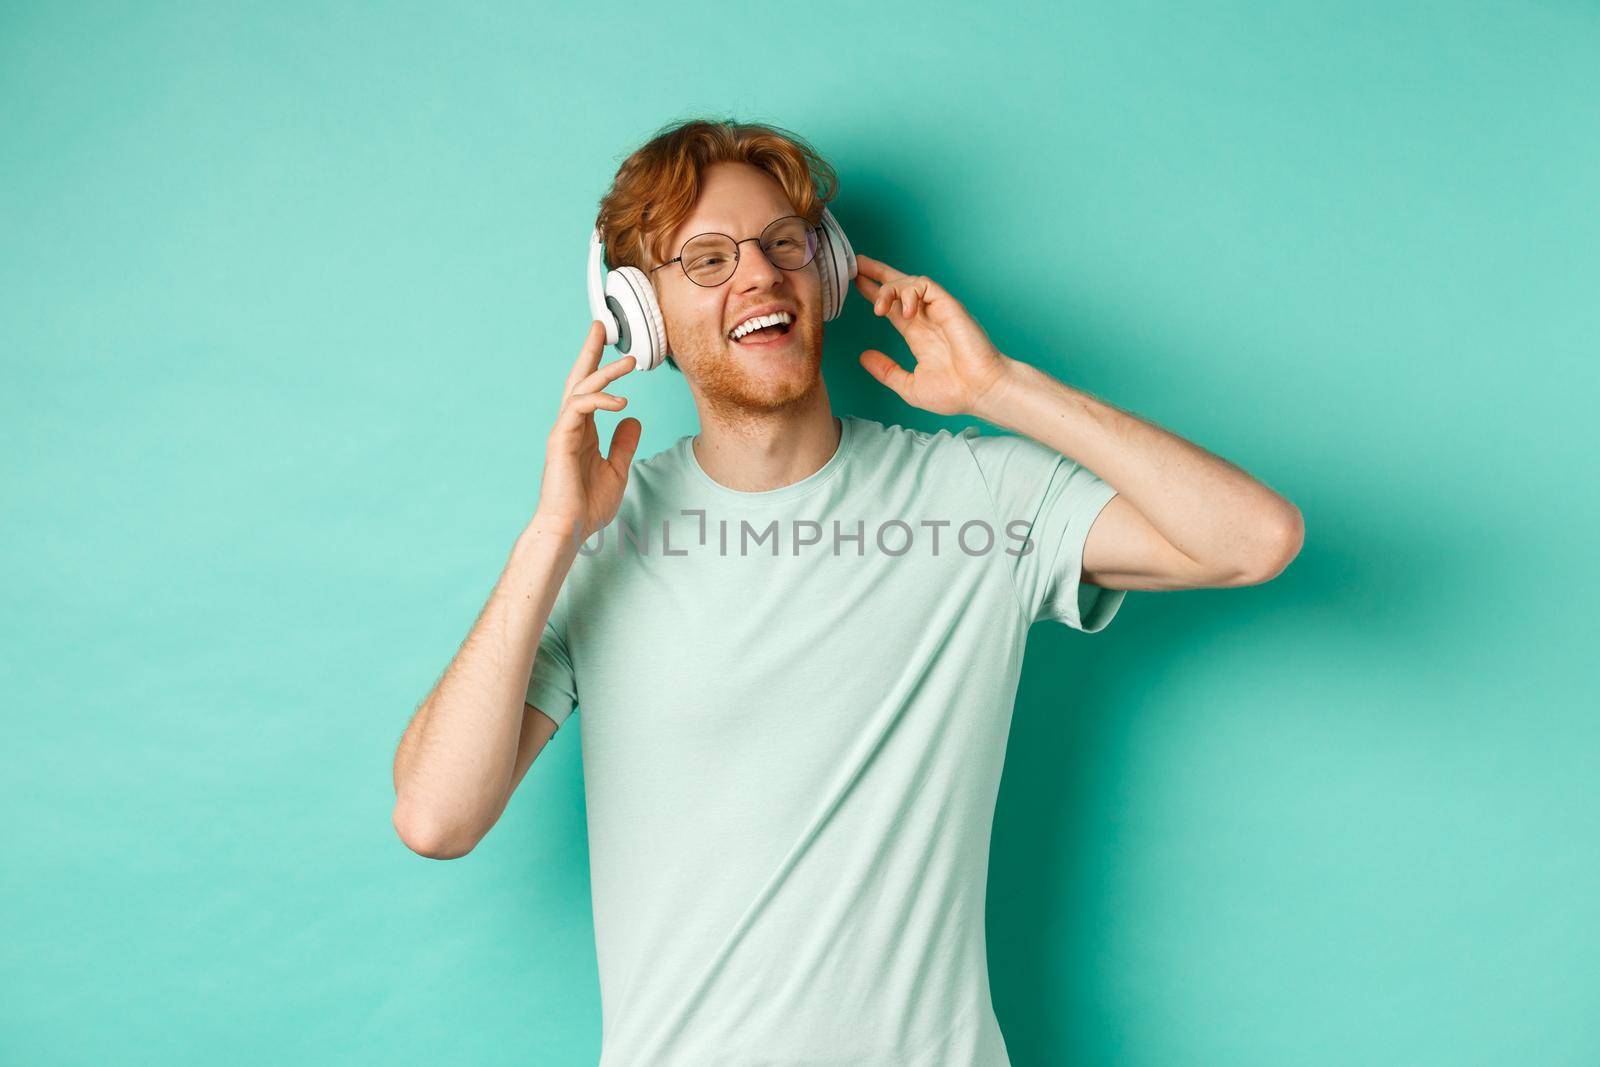 Lifestyle concept. Happy young man with ginger hair dancing and having fun, listening music on wireless headphones and smiling pleased, turquoise background.